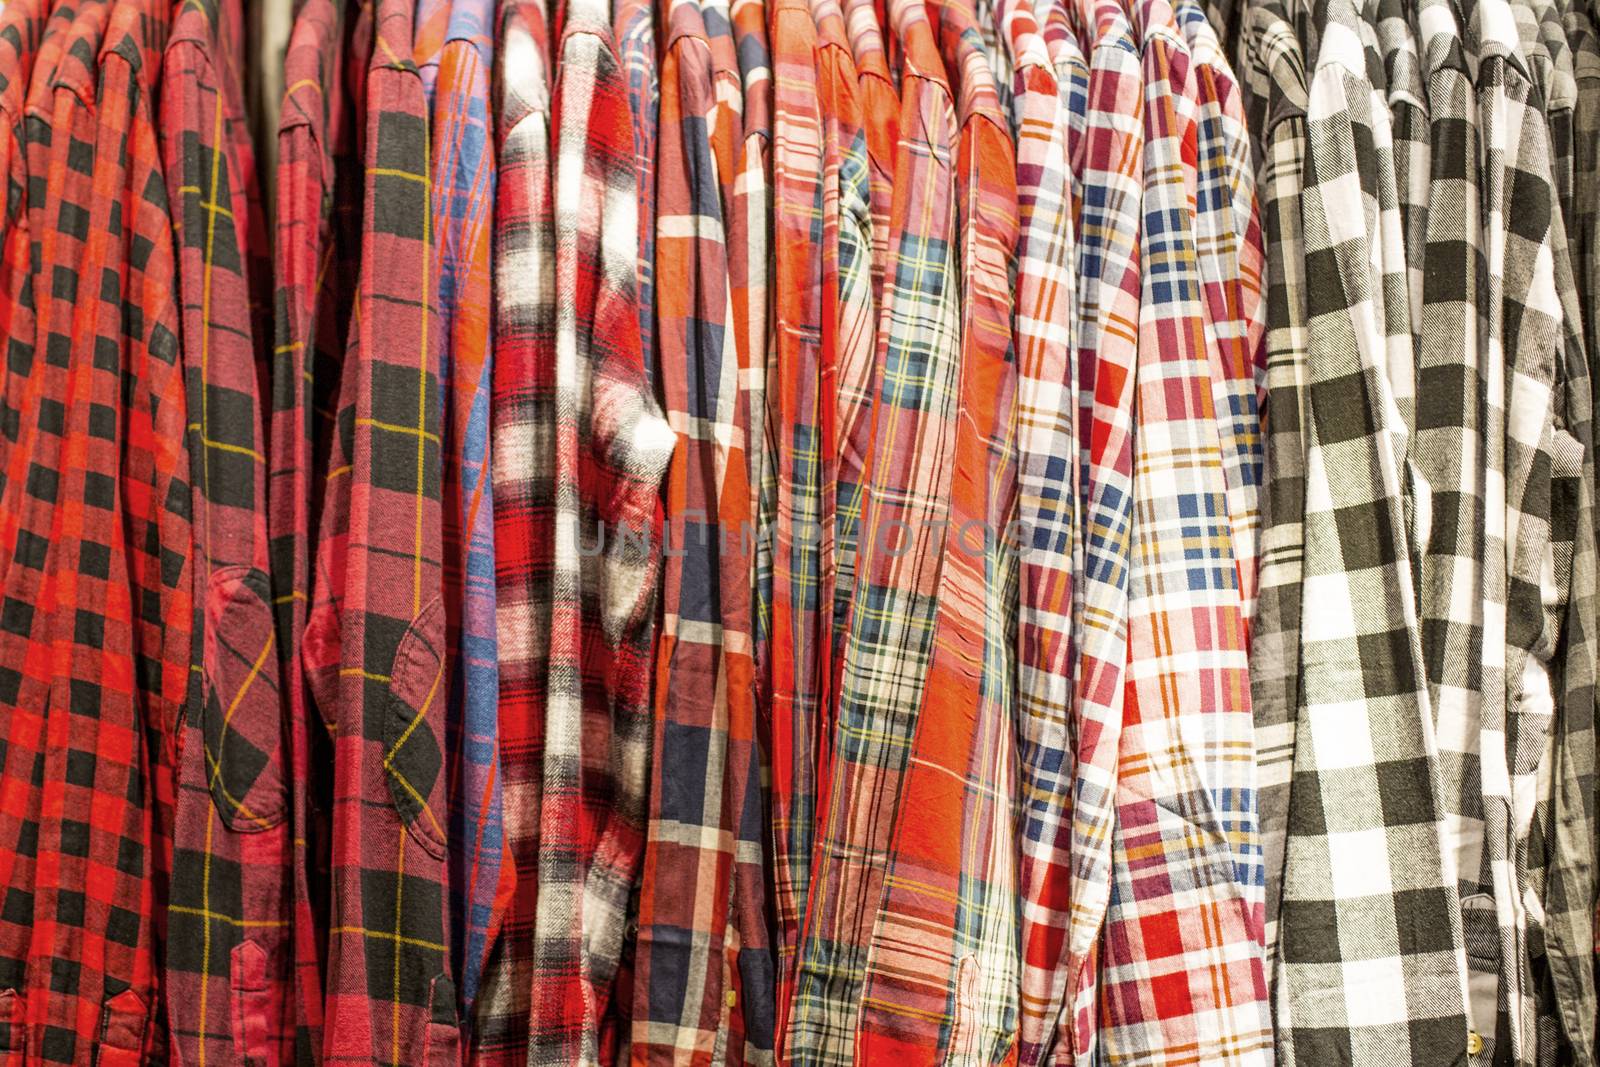 Shop Hanging Rail With Coloured Checked Mens Shirts by Whiteboxmedia